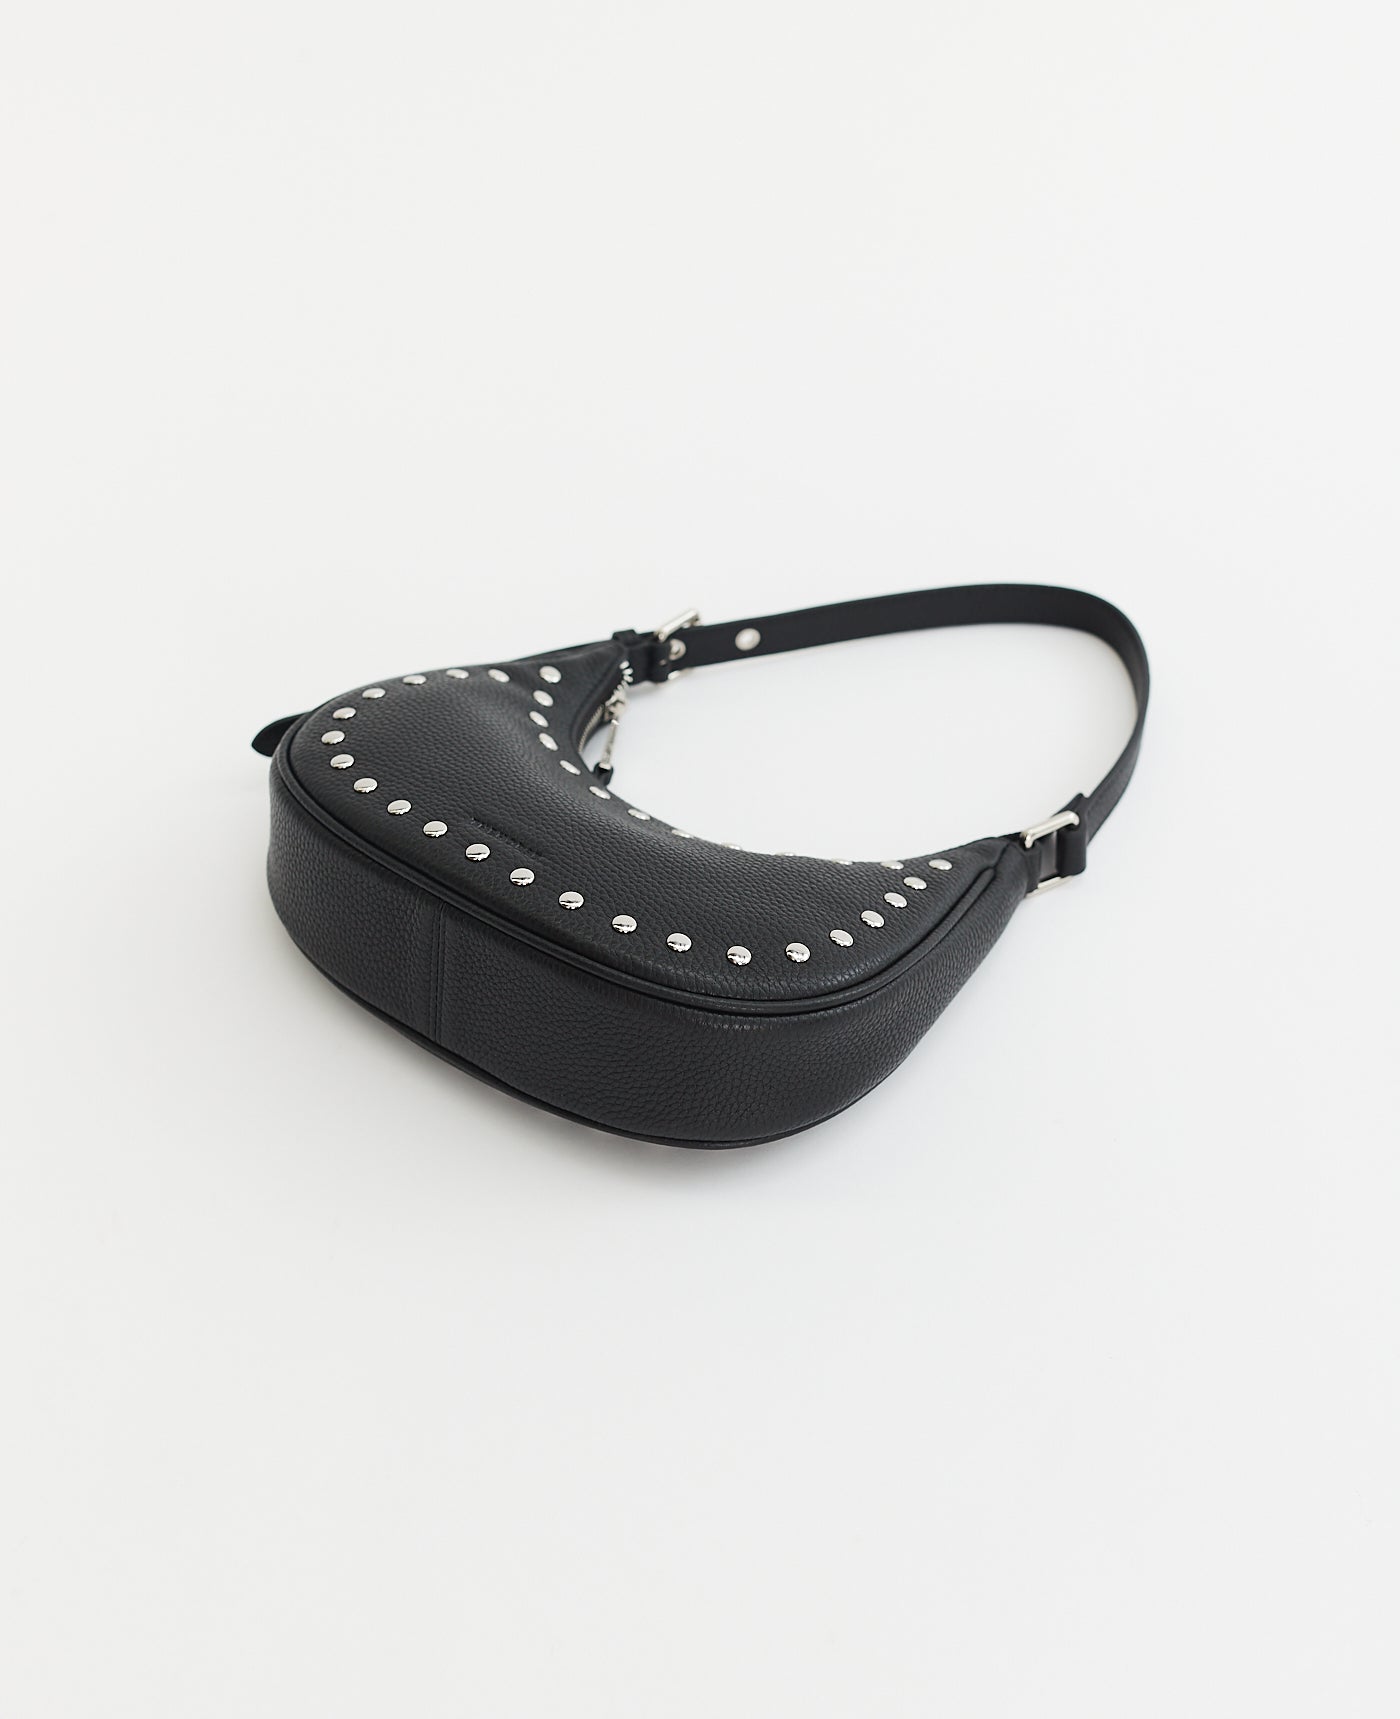 Friday Bag: Black with Studs